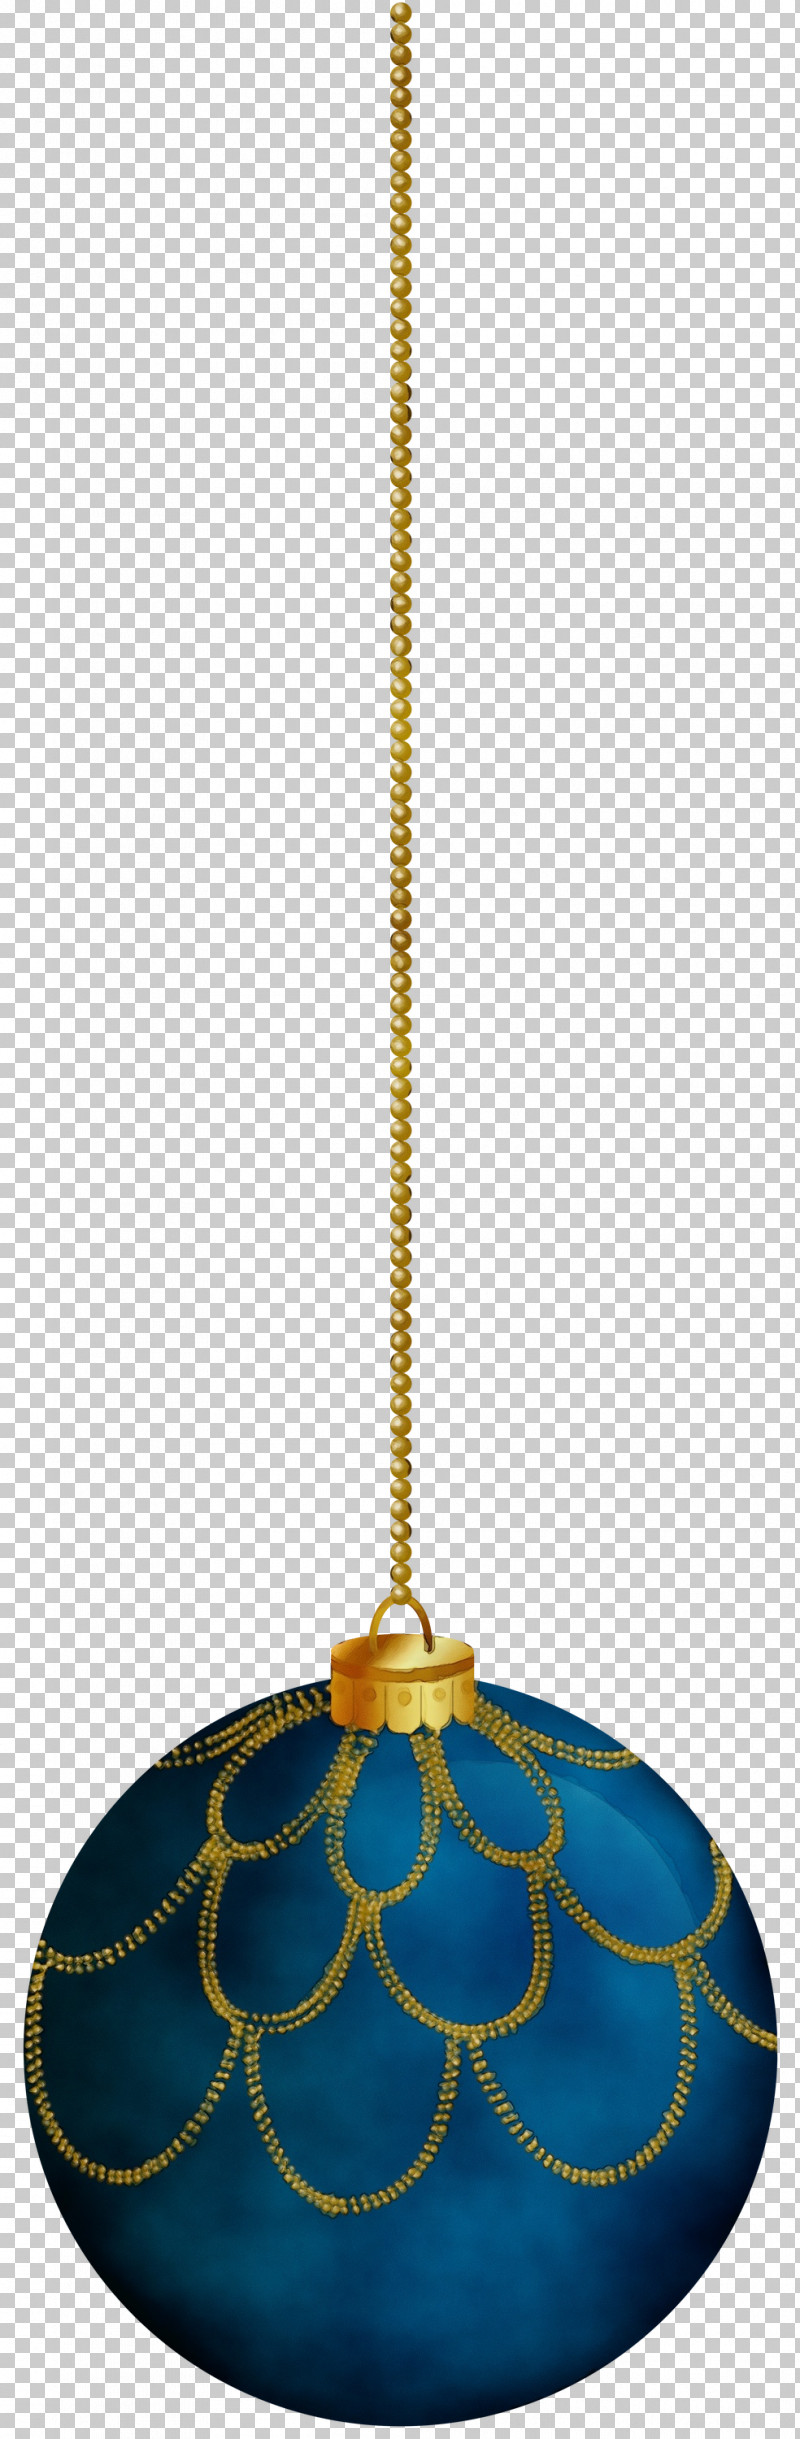 Yellow Chain Necklace Brass Light Fixture PNG, Clipart, Brass, Chain, Light Fixture, Metal, Necklace Free PNG Download